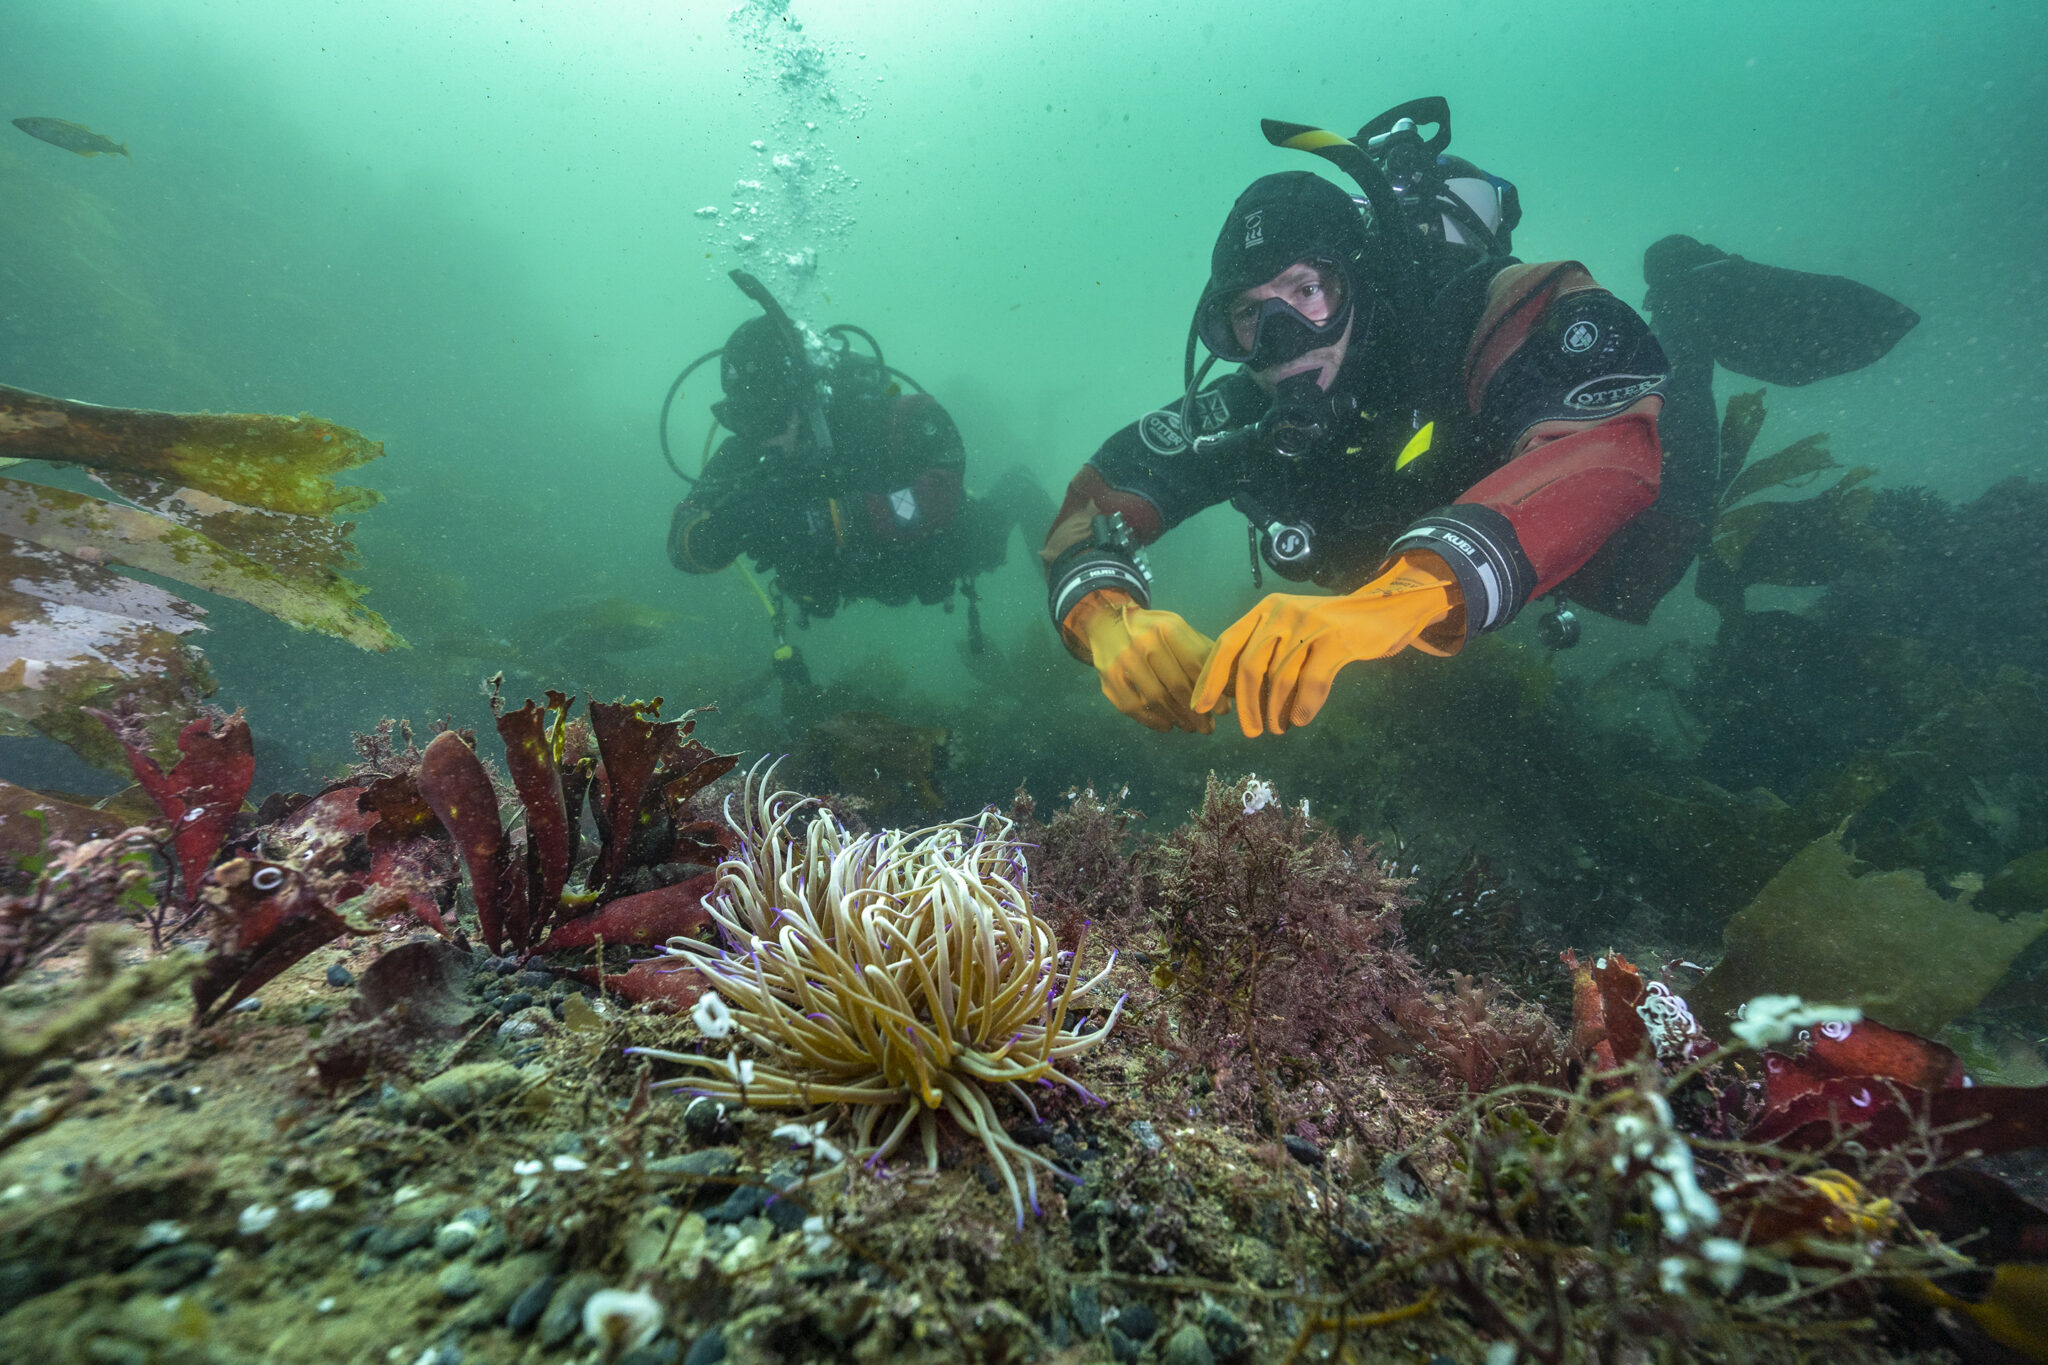 A diver looks at an anemone in the UK